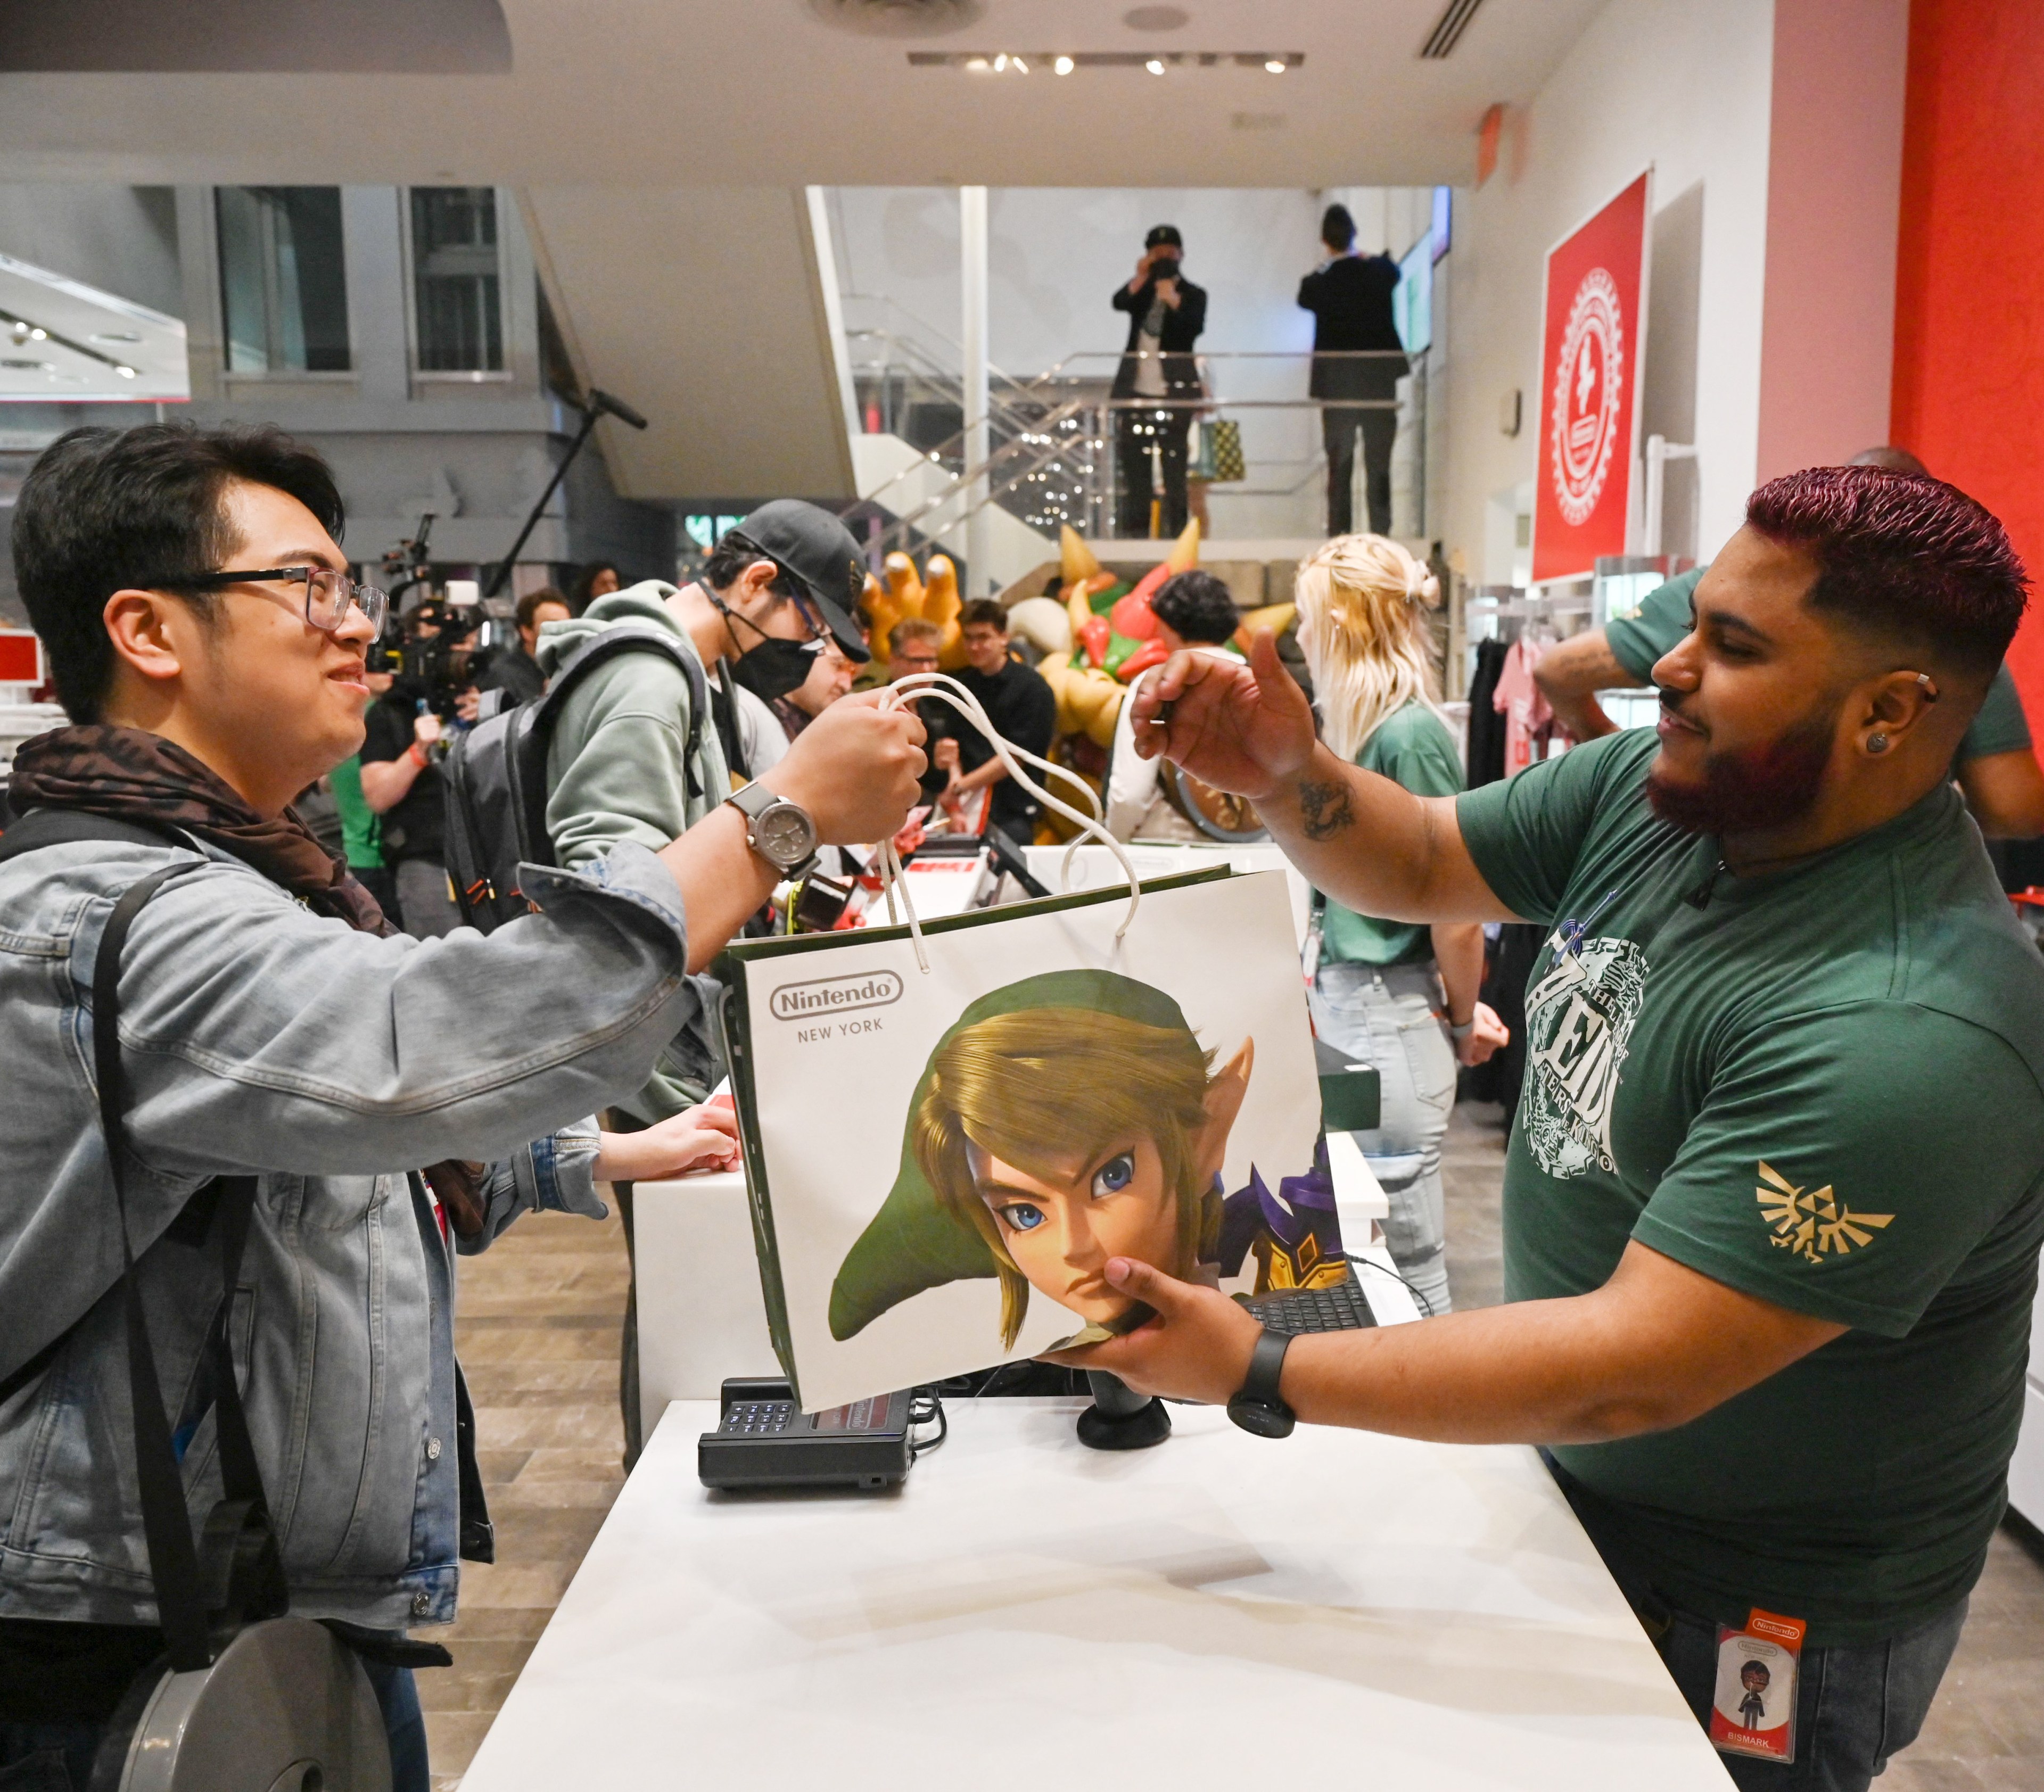 A man hands a Nintendo shopping bag featuring Link from The Legend of Zelda to a customer in a busy store with people and gaming merchandise in the background.